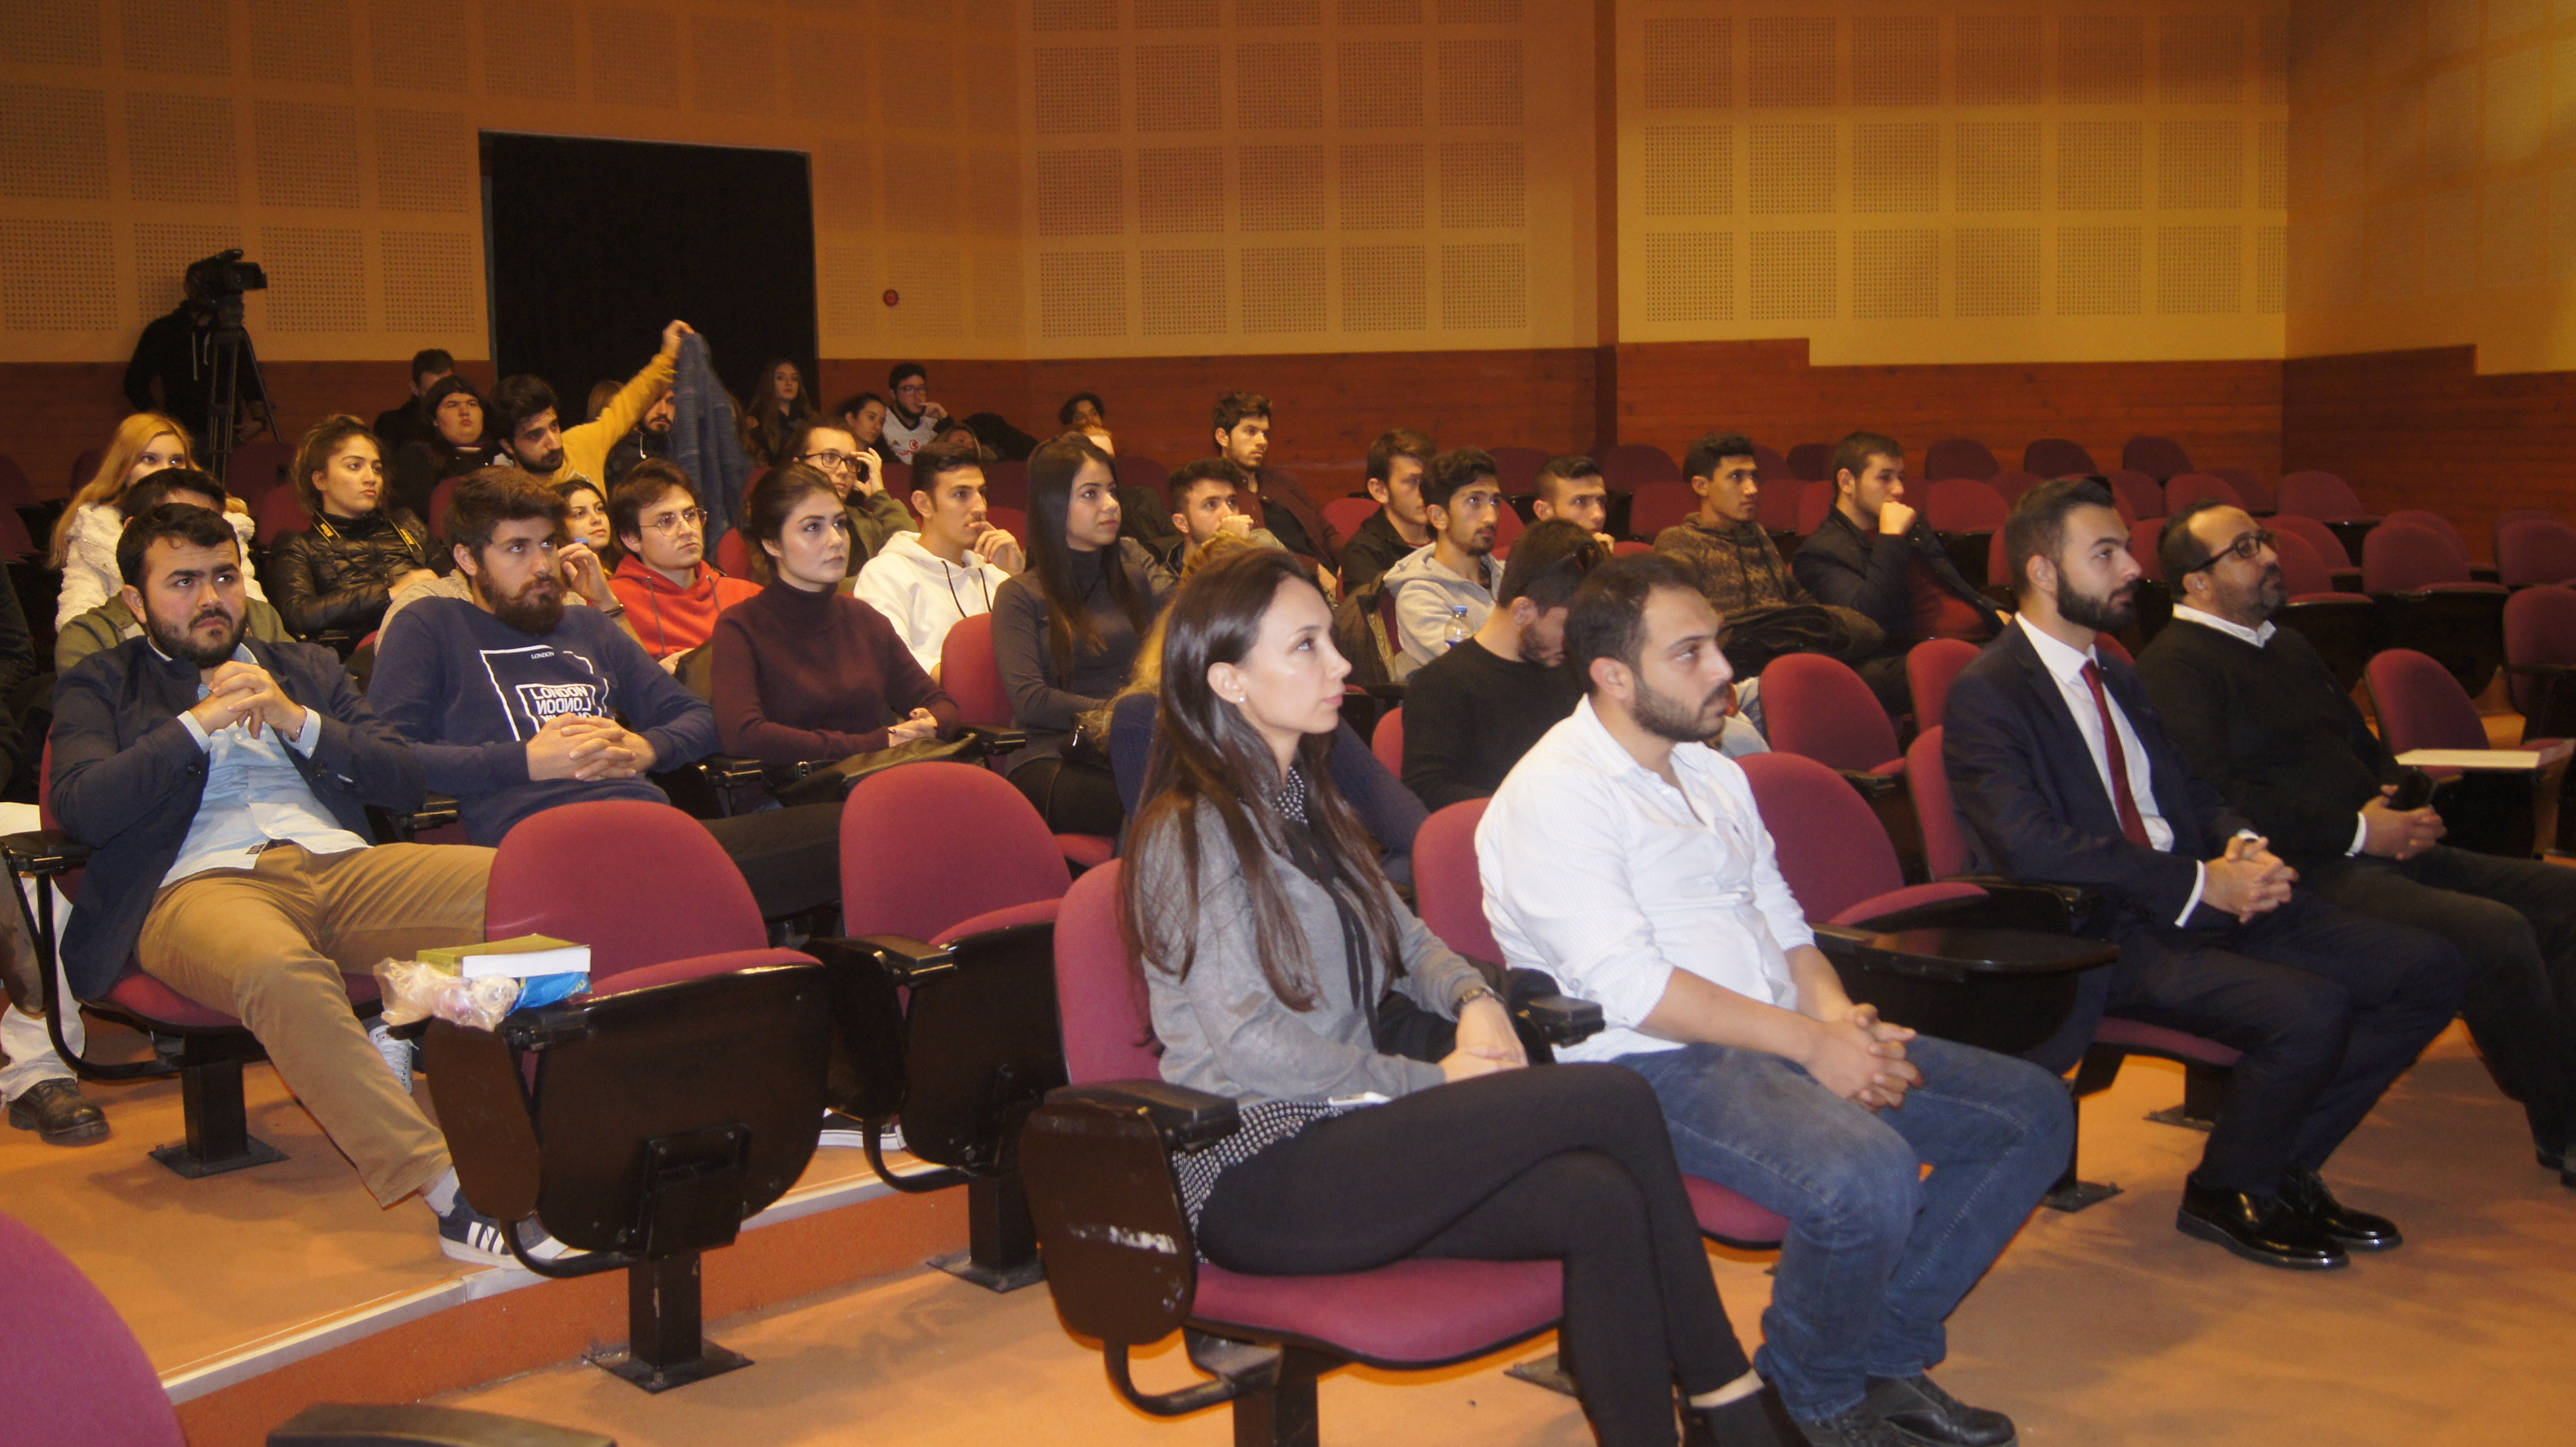 A Conference titled as “Freedom of the Media” has been held at the Near East University Faculty of Communication